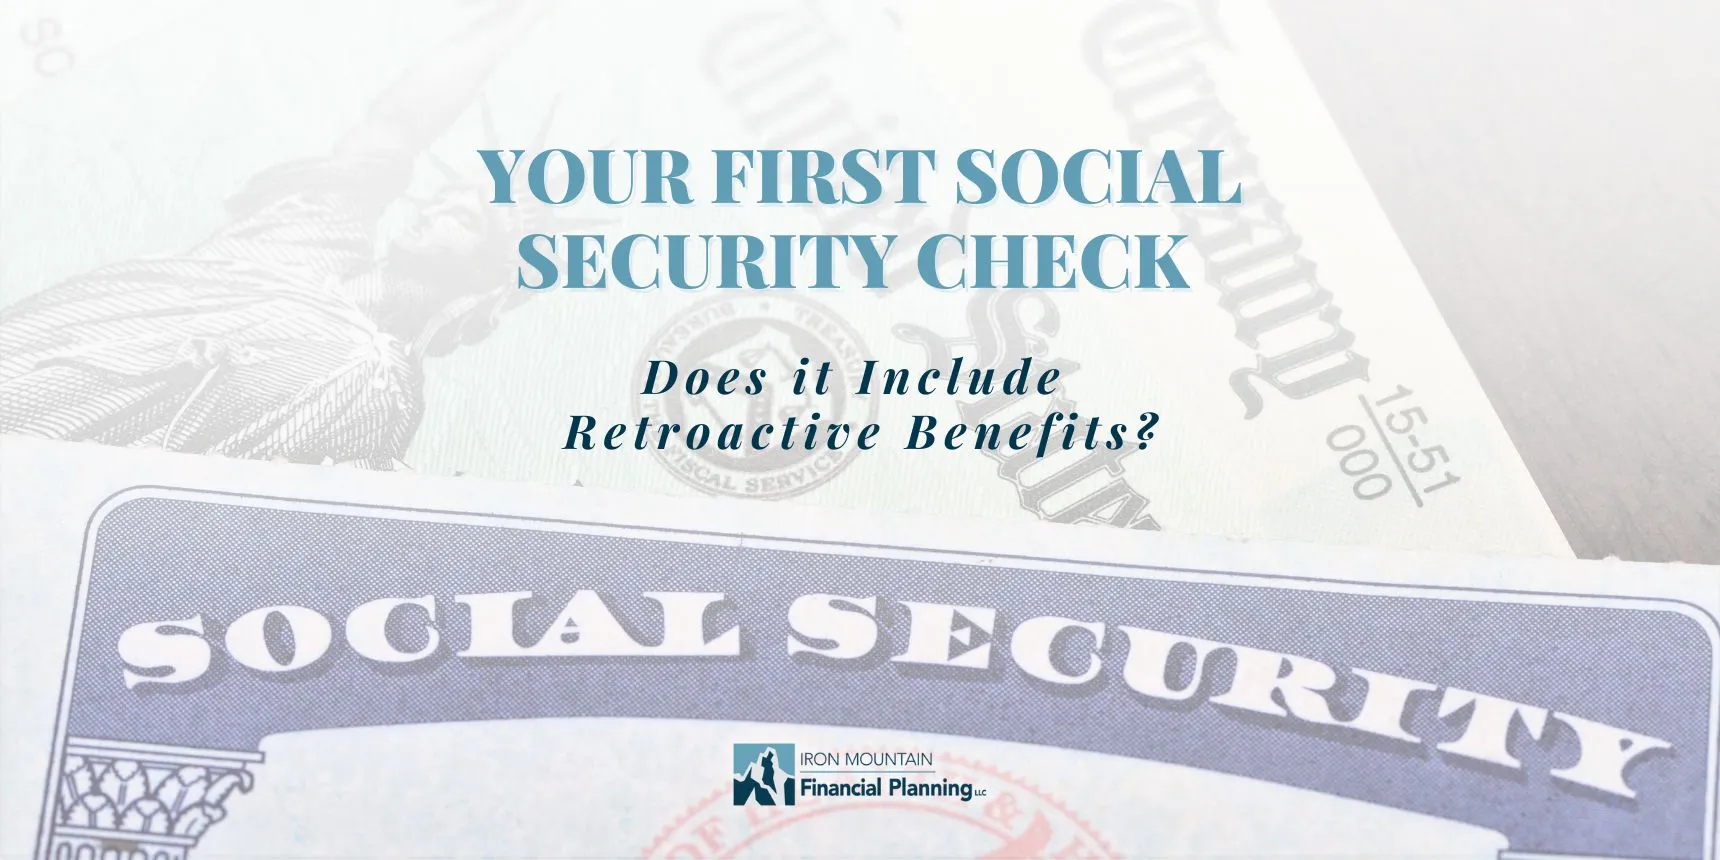 Find out if your first social security check retroactive